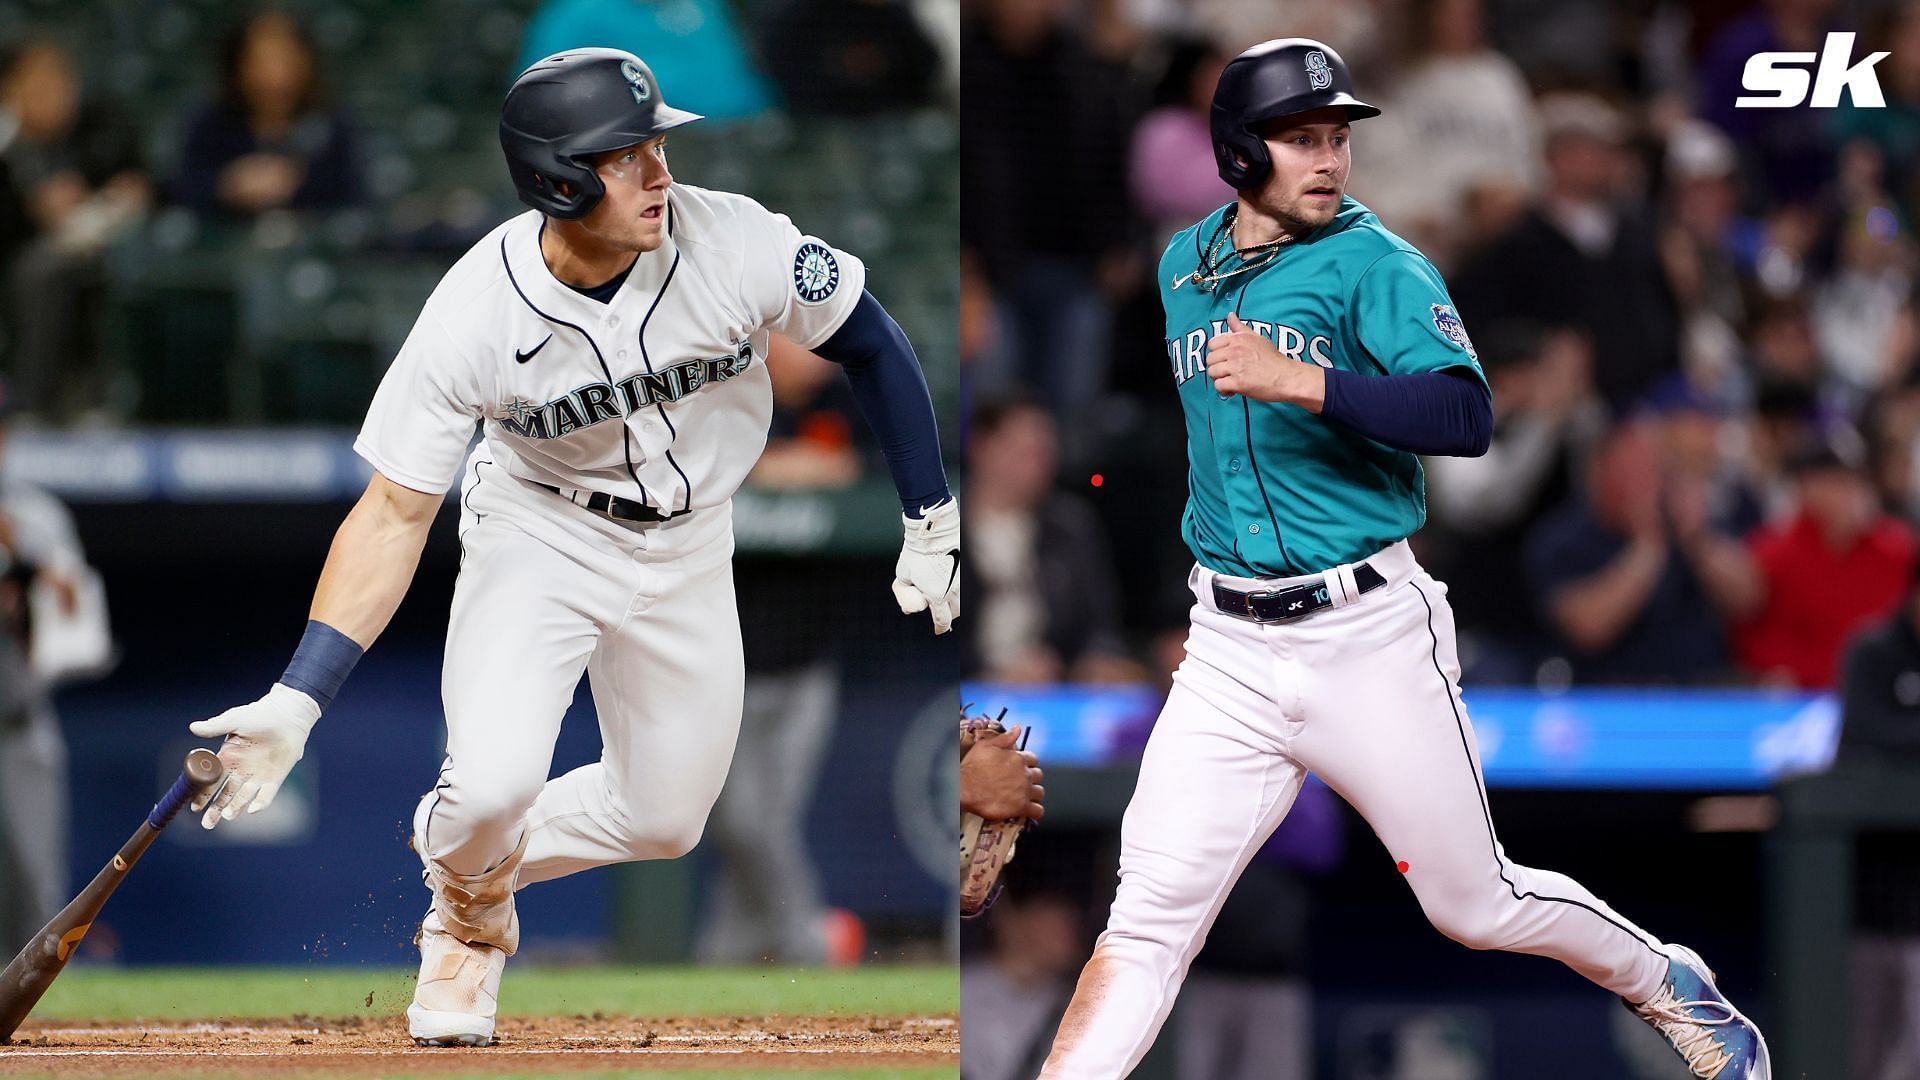 Jarred Kelenic has been traded by the Mariners to the Braves